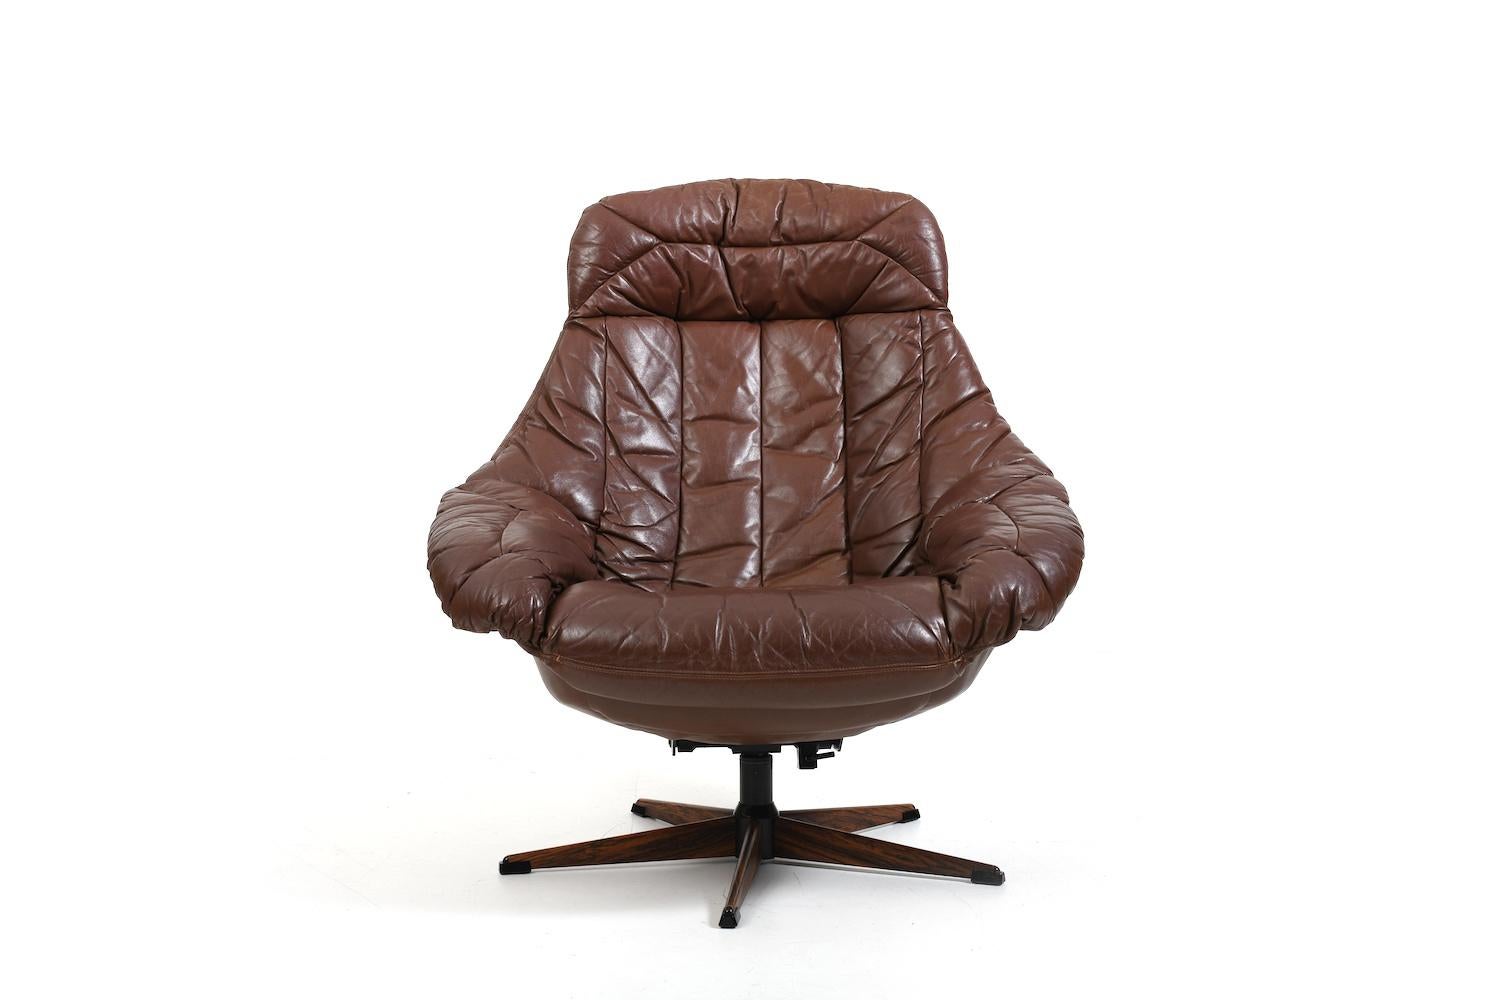 Steel Henry W. Klein Leather Swivel Lounge Chair 1960s For Sale